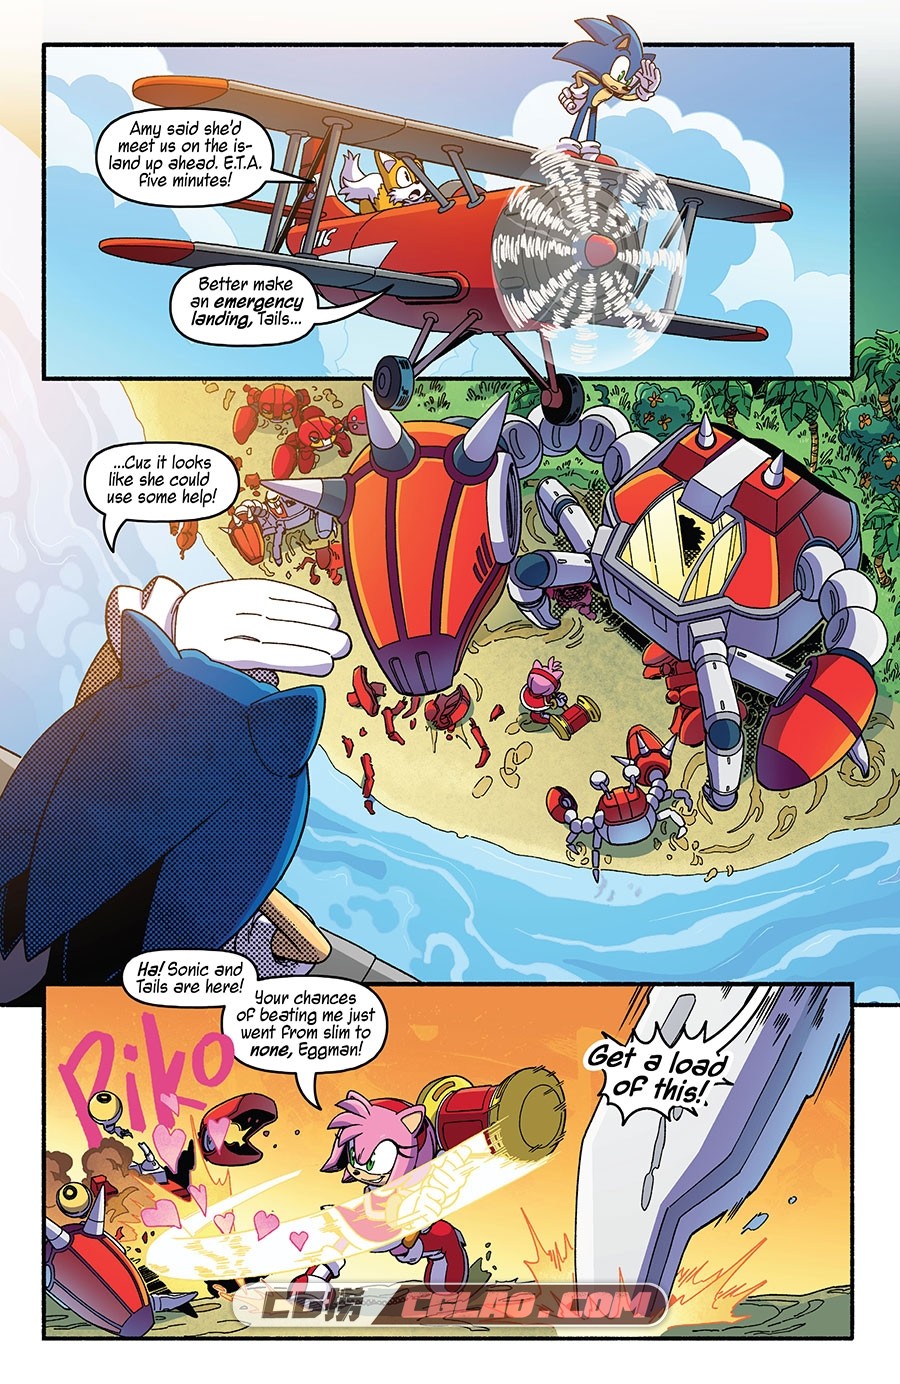 Sonic Frontiers Prologue Convergence 漫画 百度网盘下载,Sonic-Frontiers-Prologue---Convergence-002.jpg